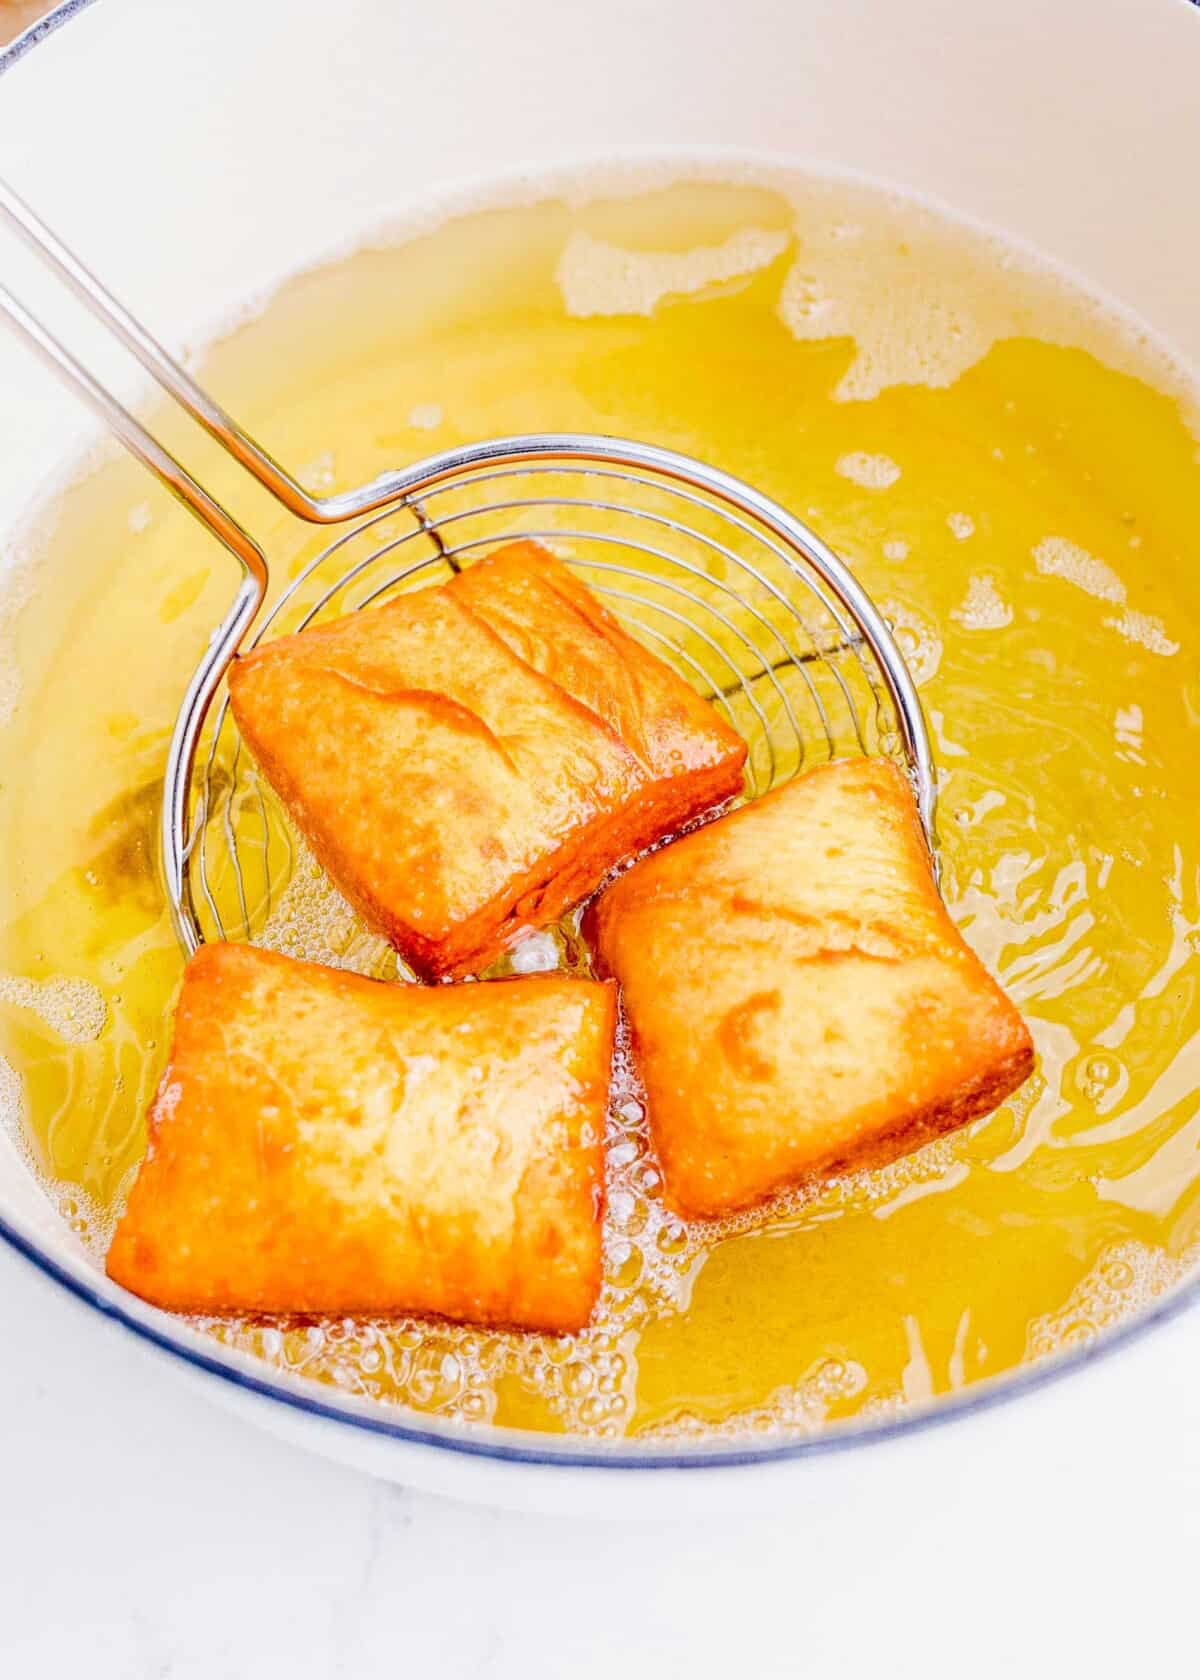 Three beignets are being fried in a large pot full of yellow vegetable oil.